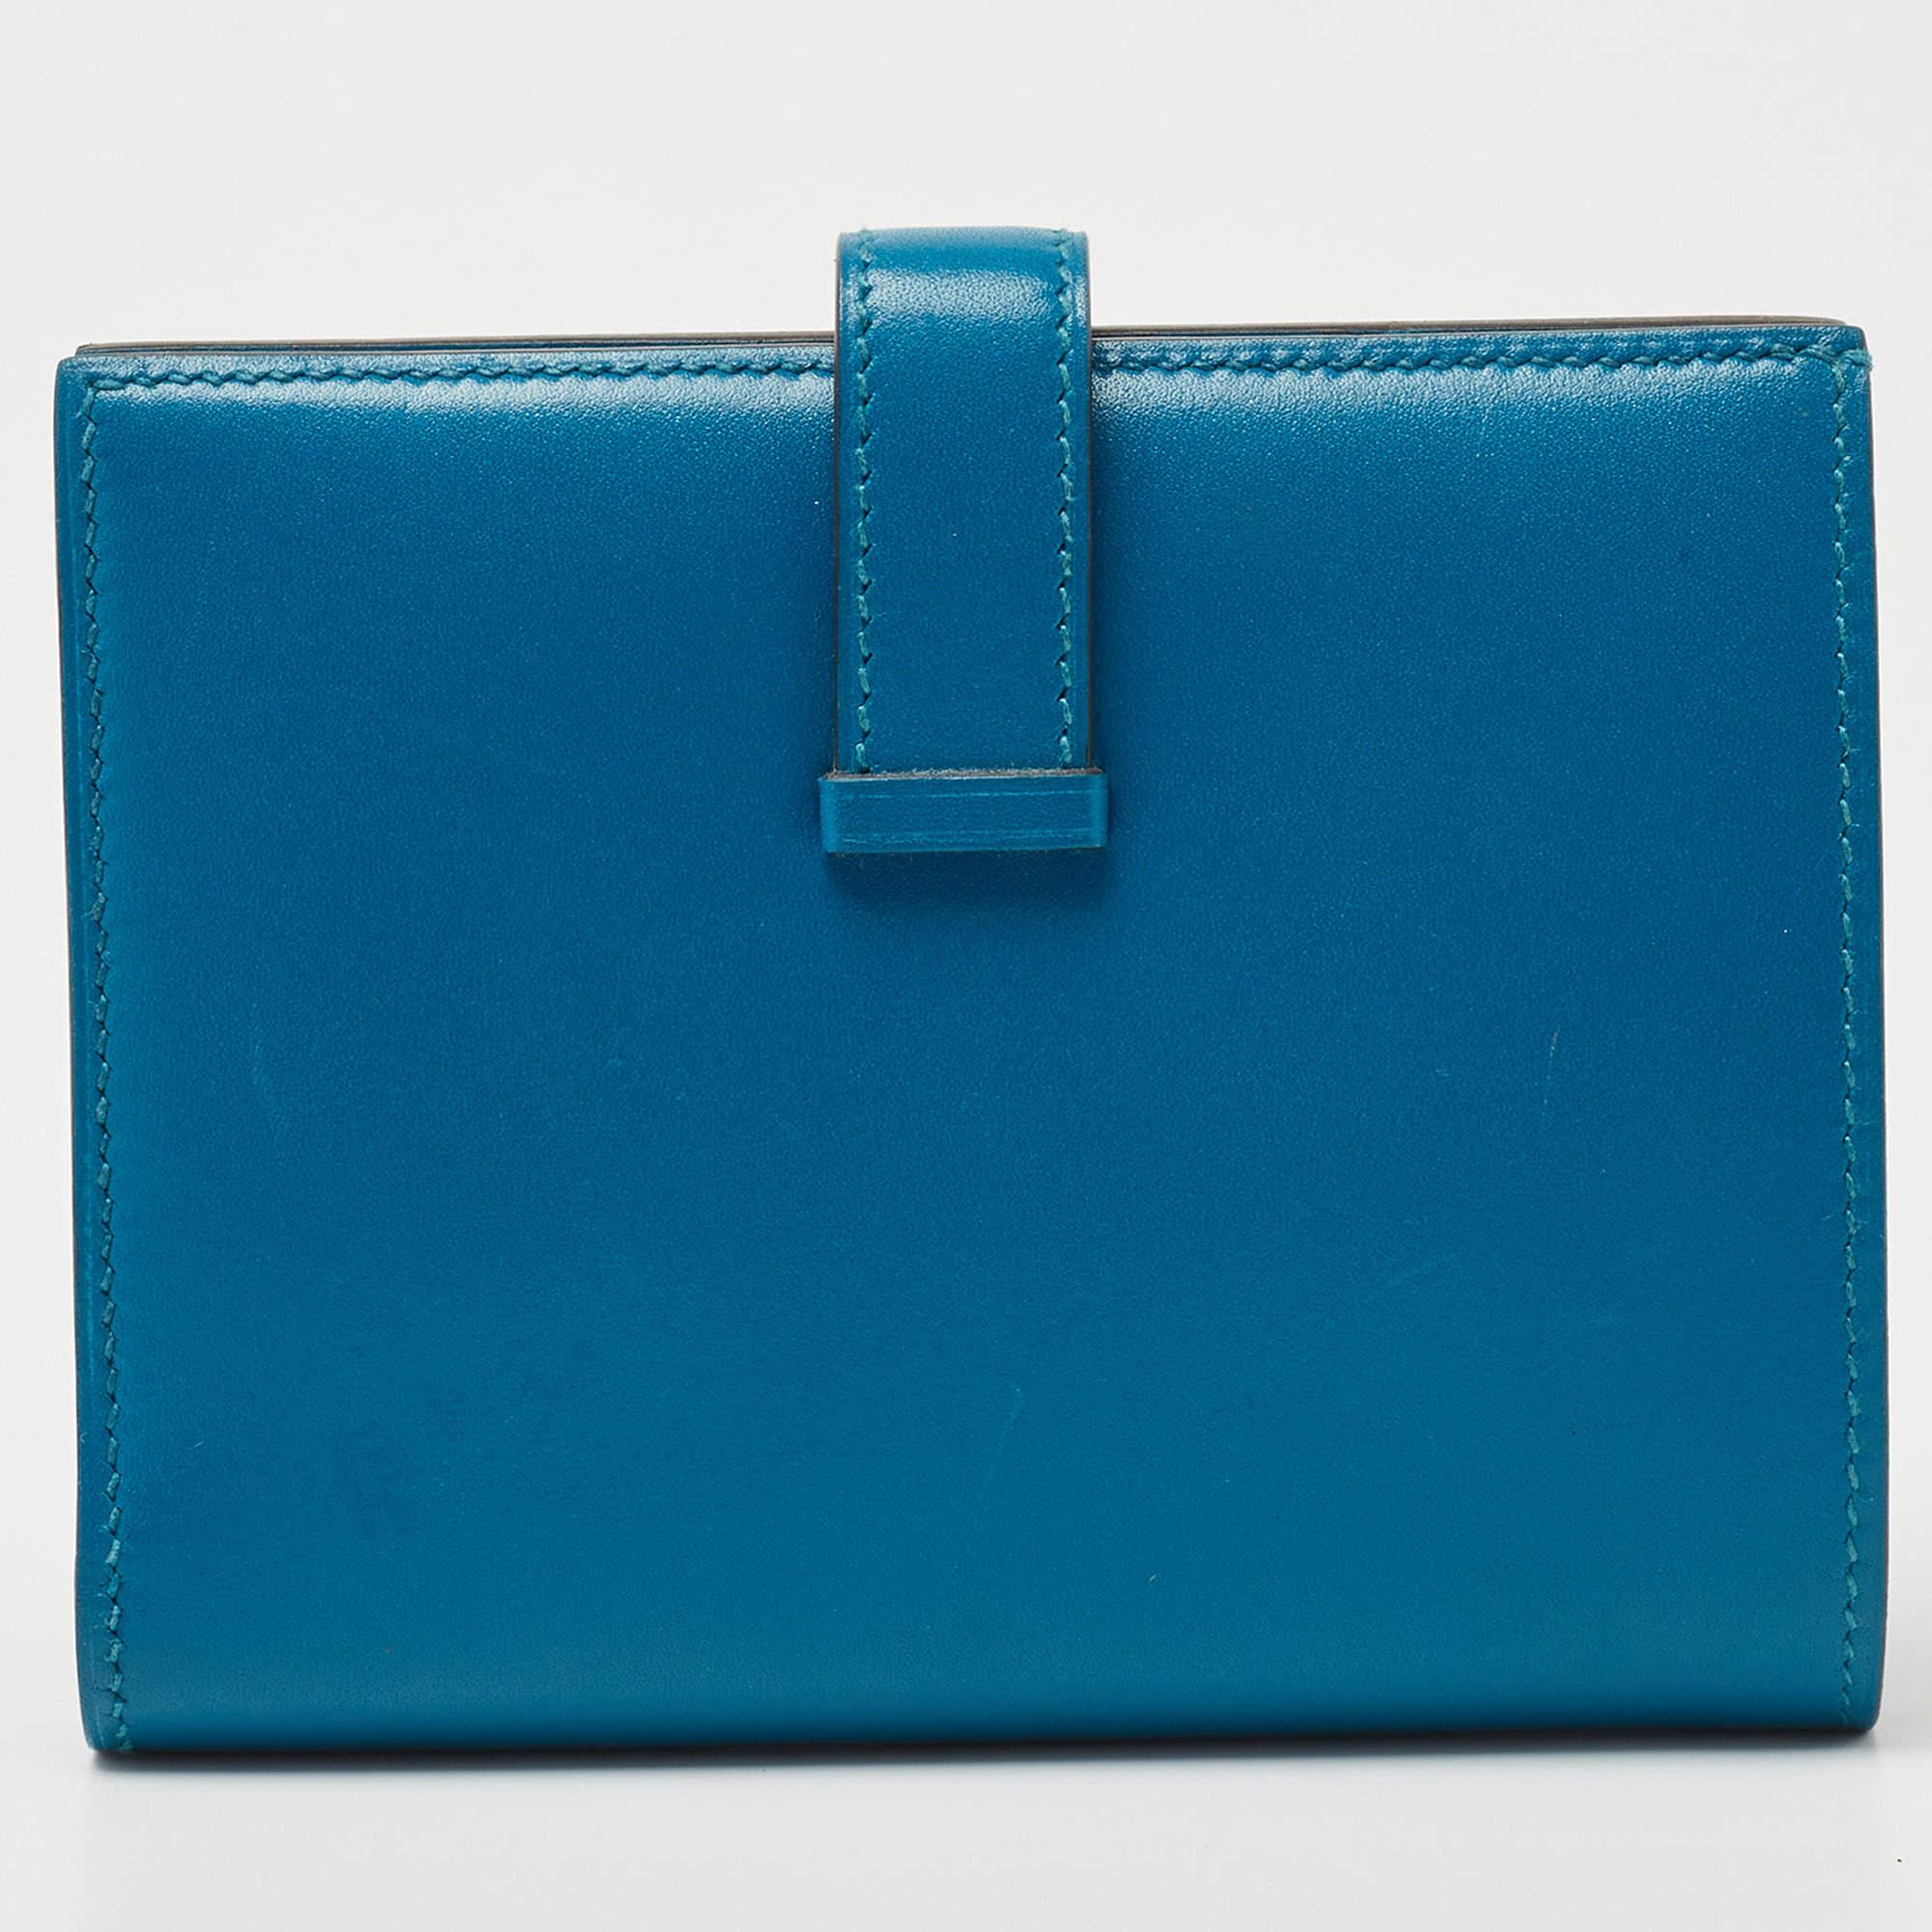 This authentic Hermes wallet is an immaculate balance of sophistication and rational utility. It has been designed using prime quality materials and elevated by a sleek finish. The creation is equipped with ample space for your monetary essentials.

